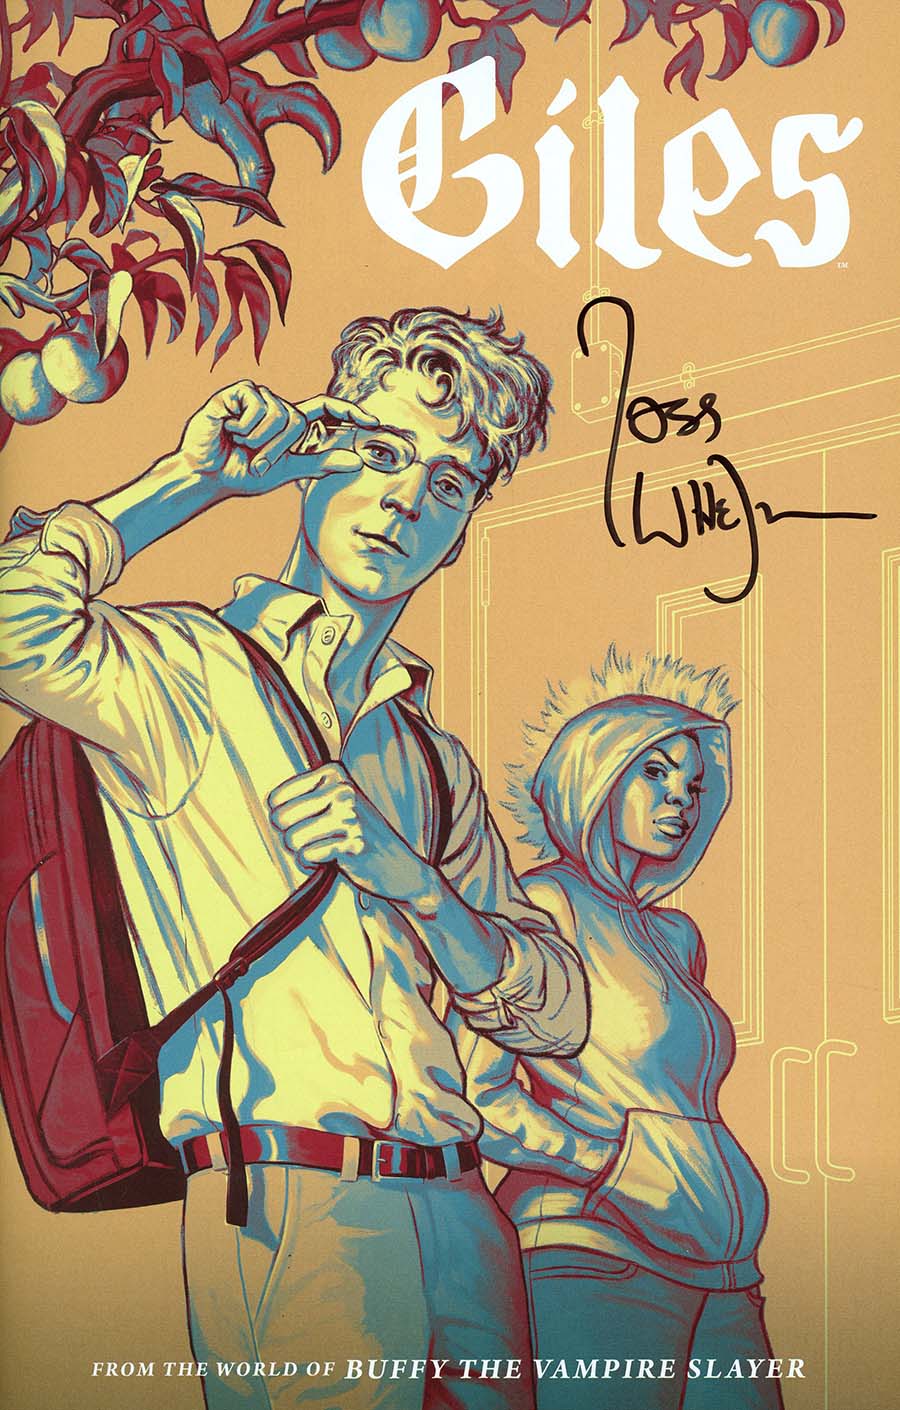 Buffy The Vampire Slayer Season 11 Giles #1 Cover D ComicsPro Exclusive Variant Cover Signed By Joss Whedon